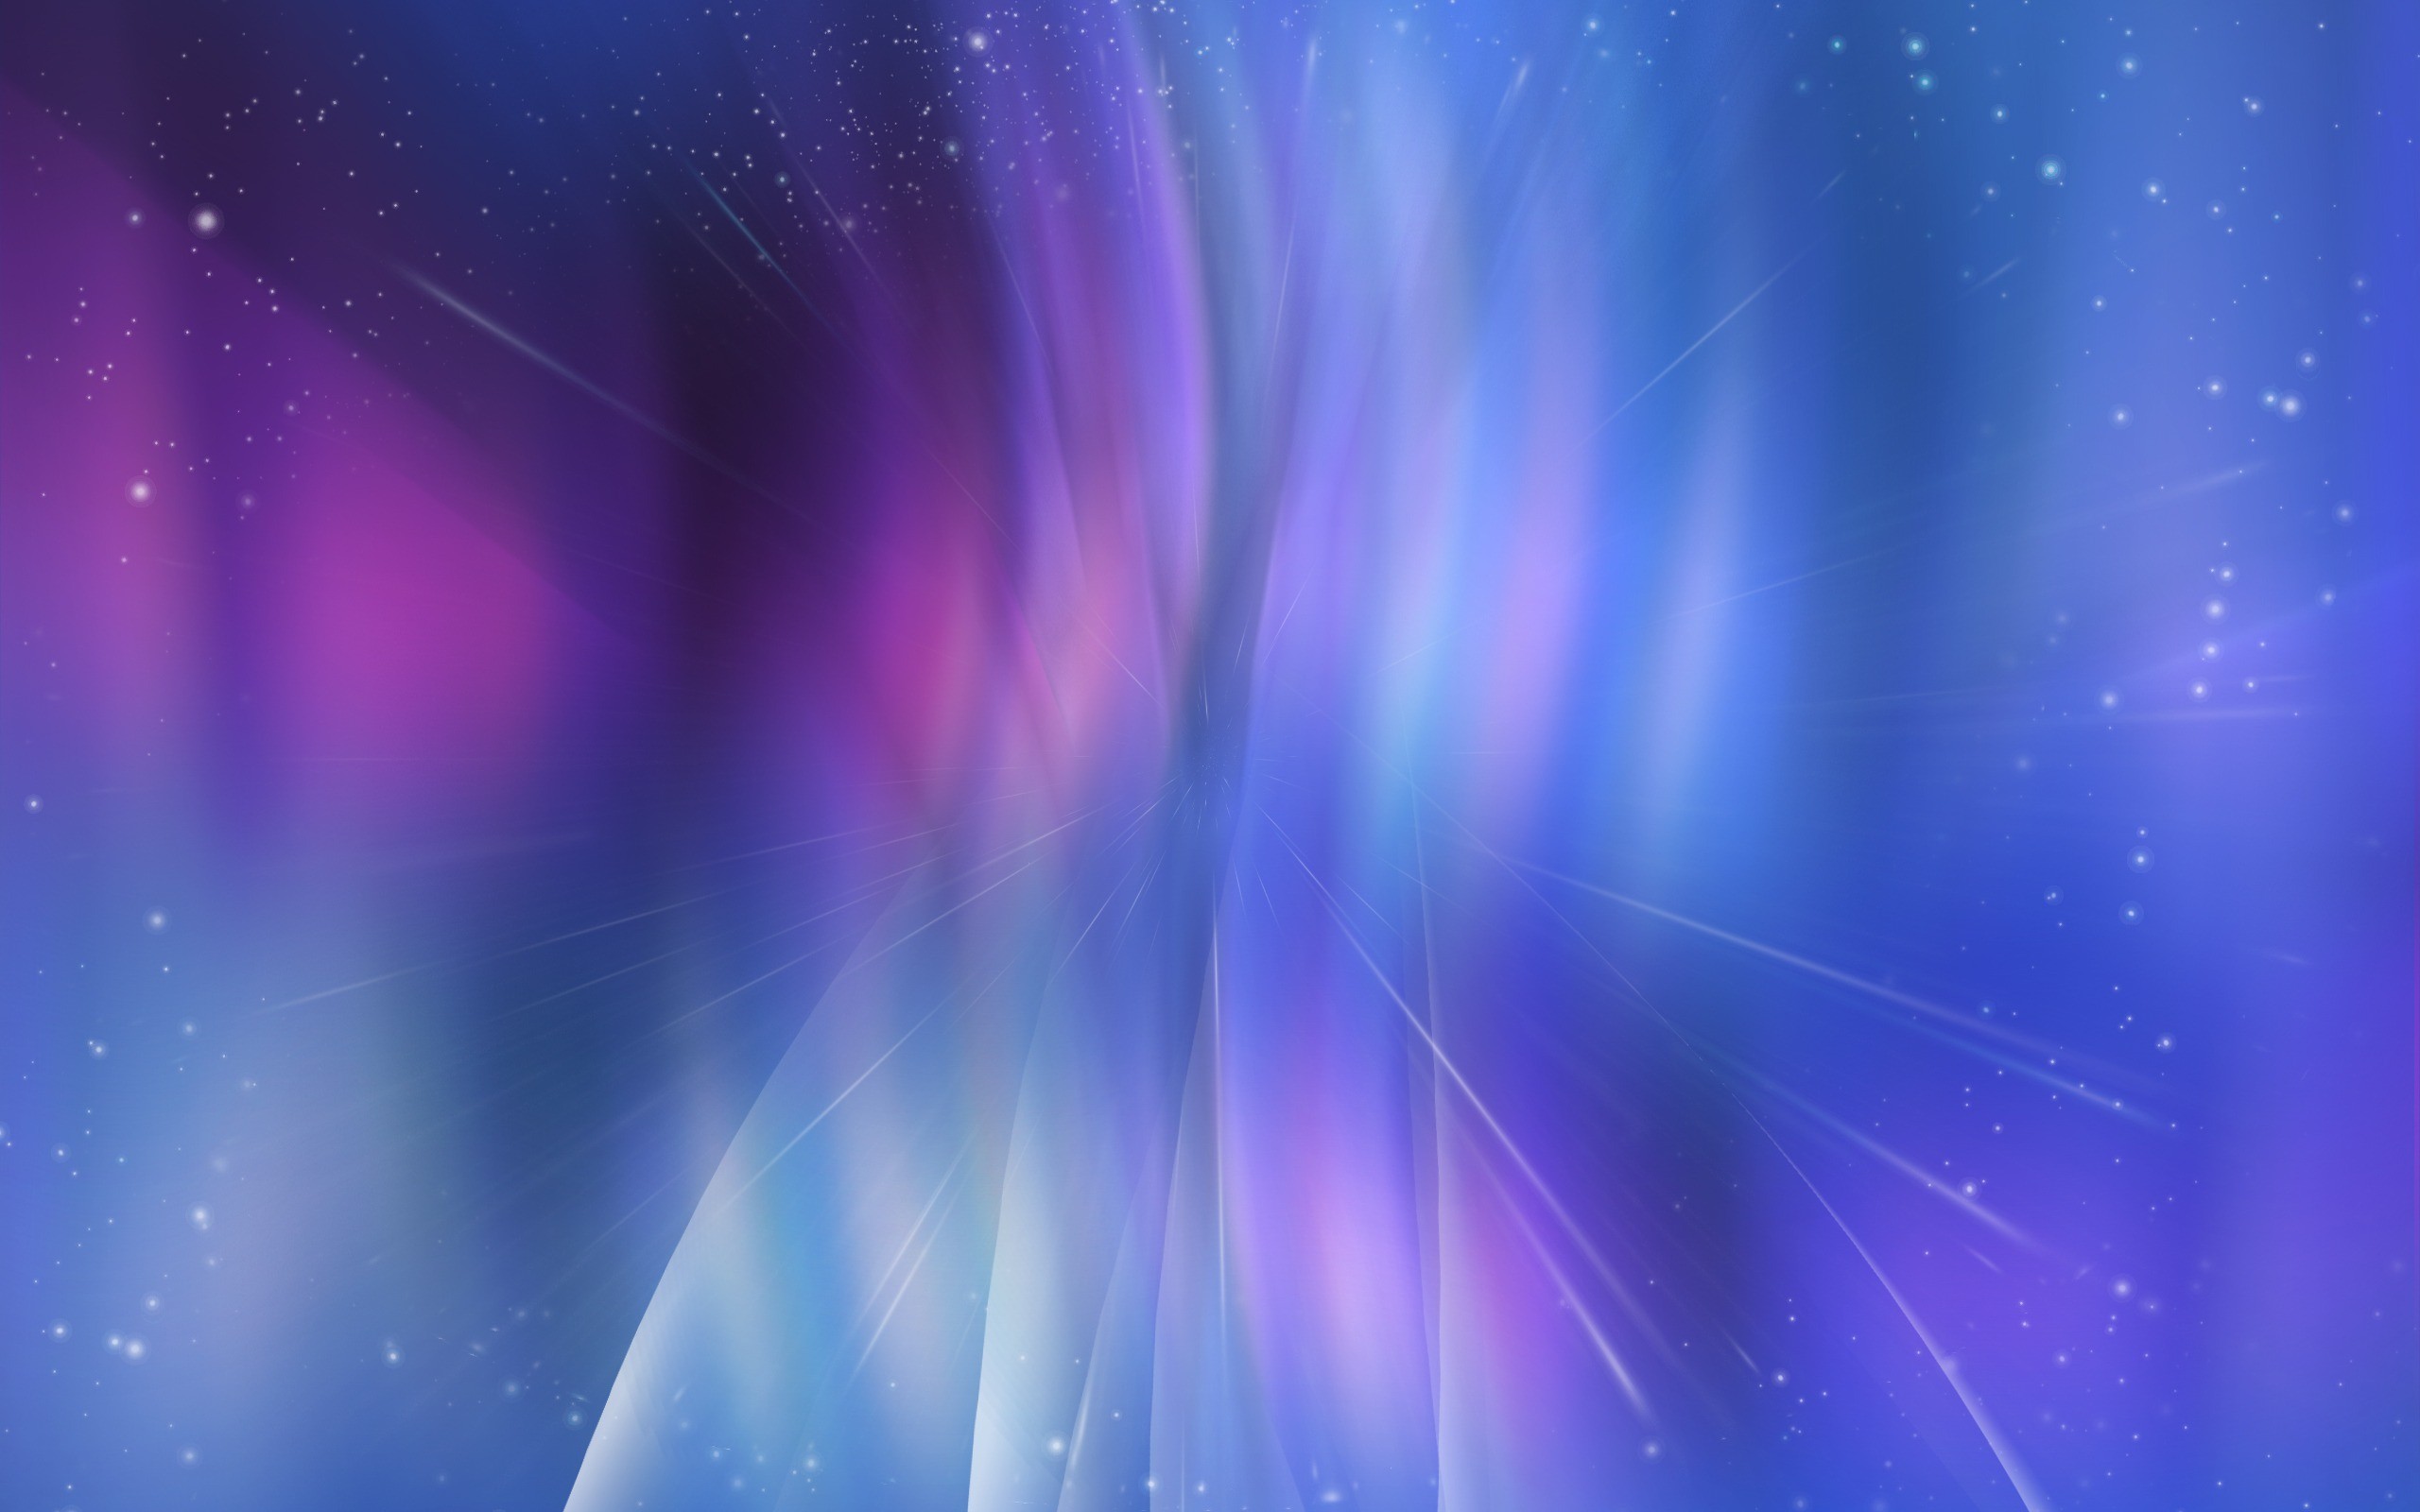 2560x1600 Abstract HD S 9996 Wallpapers - http://hdwallpapersf.com/abstract-